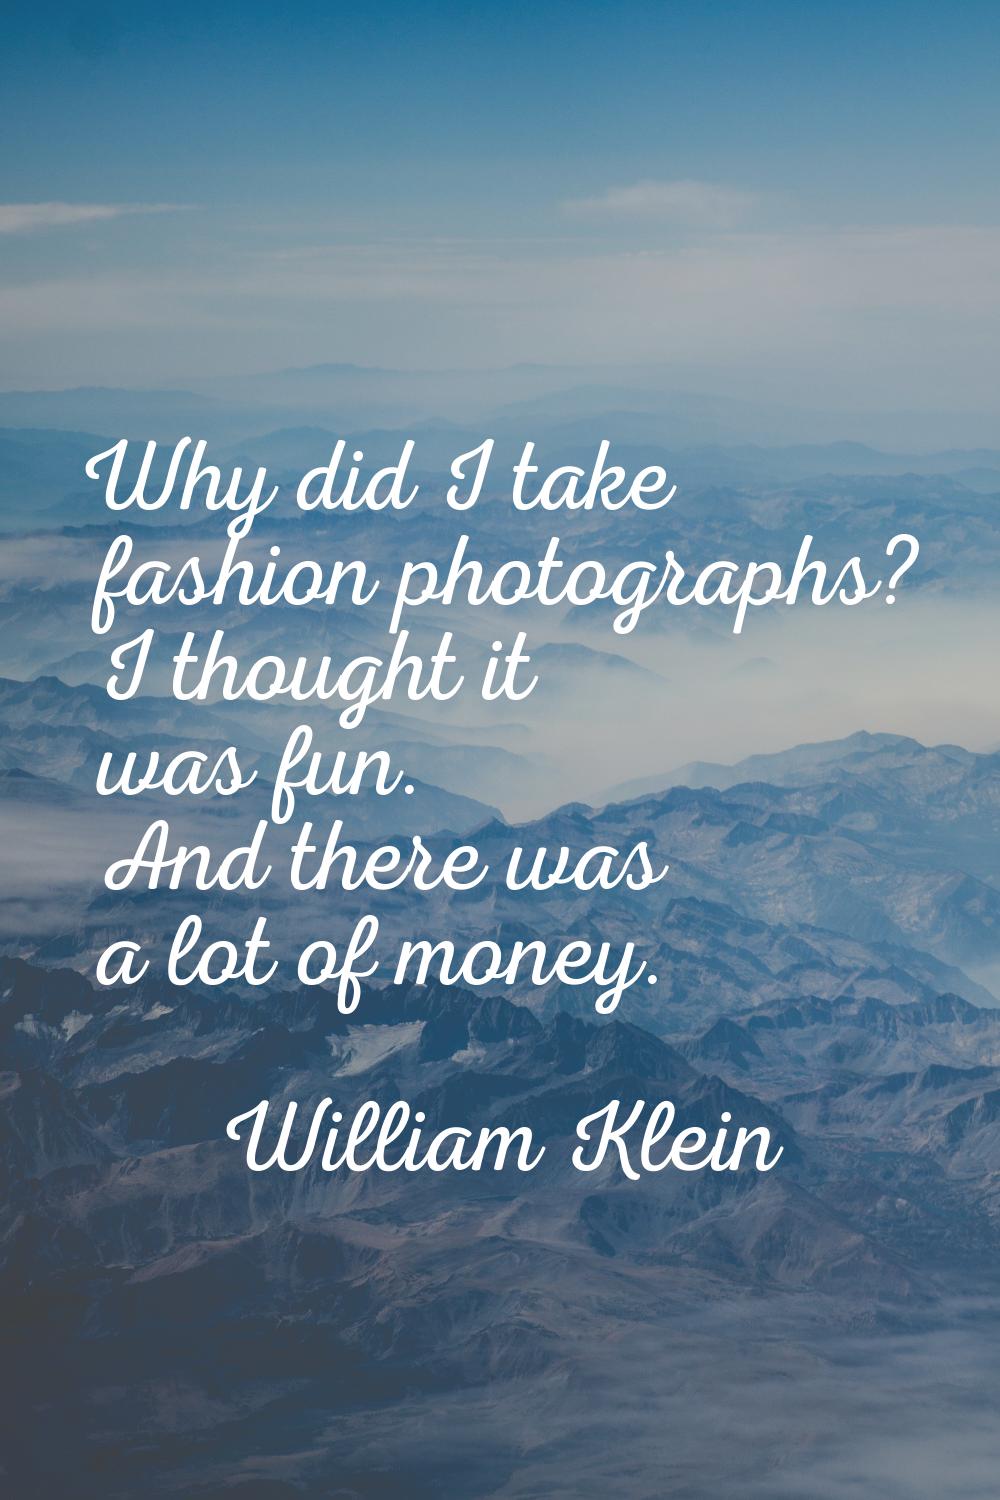 Why did I take fashion photographs? I thought it was fun. And there was a lot of money.